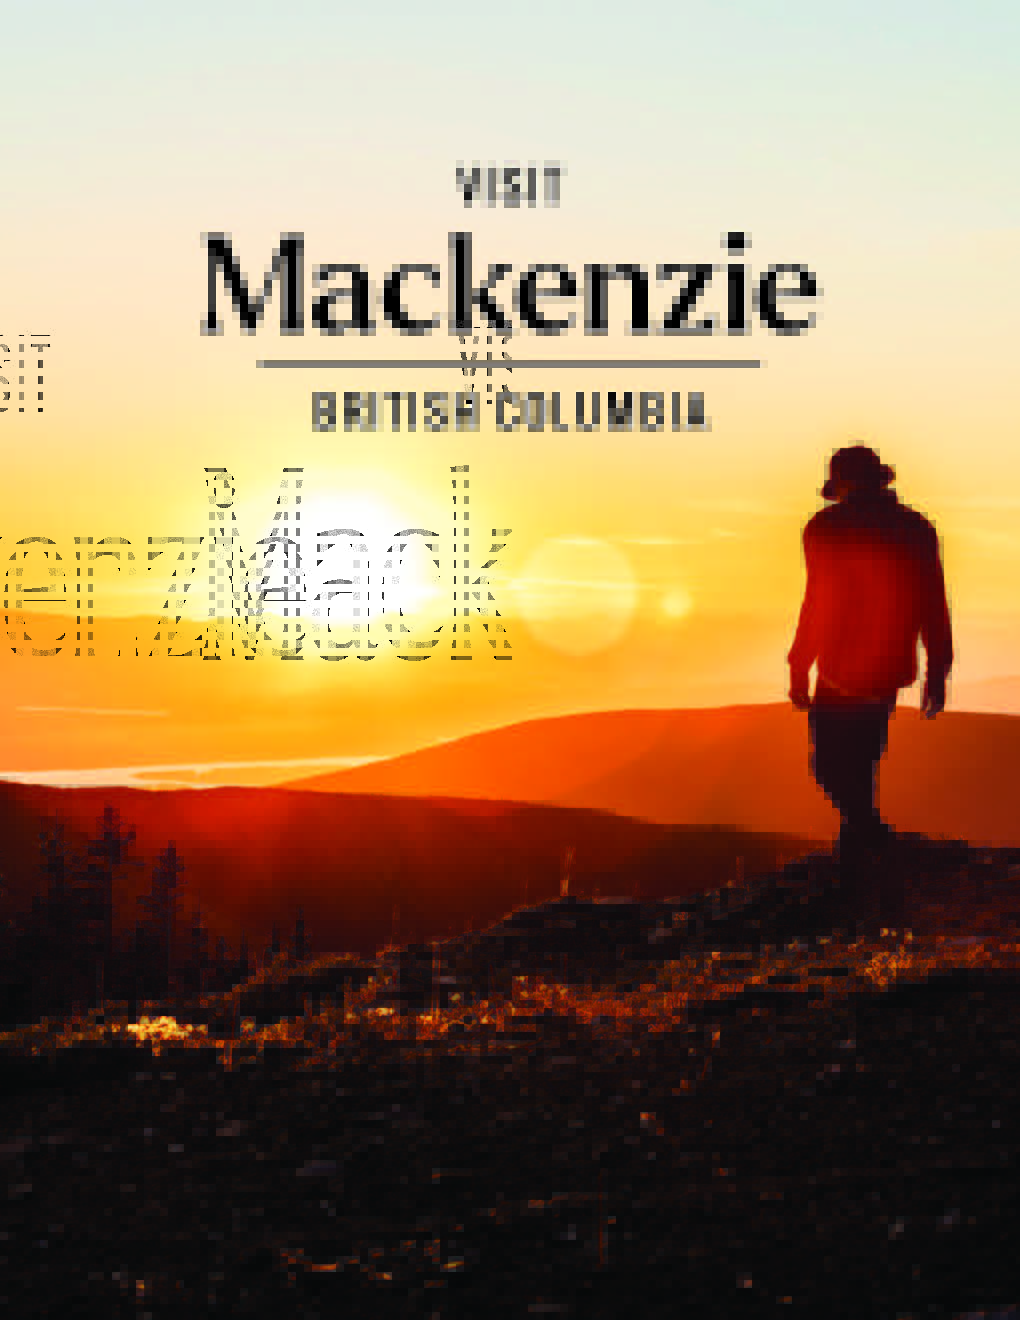 Tourism Guide District of Mackenzie